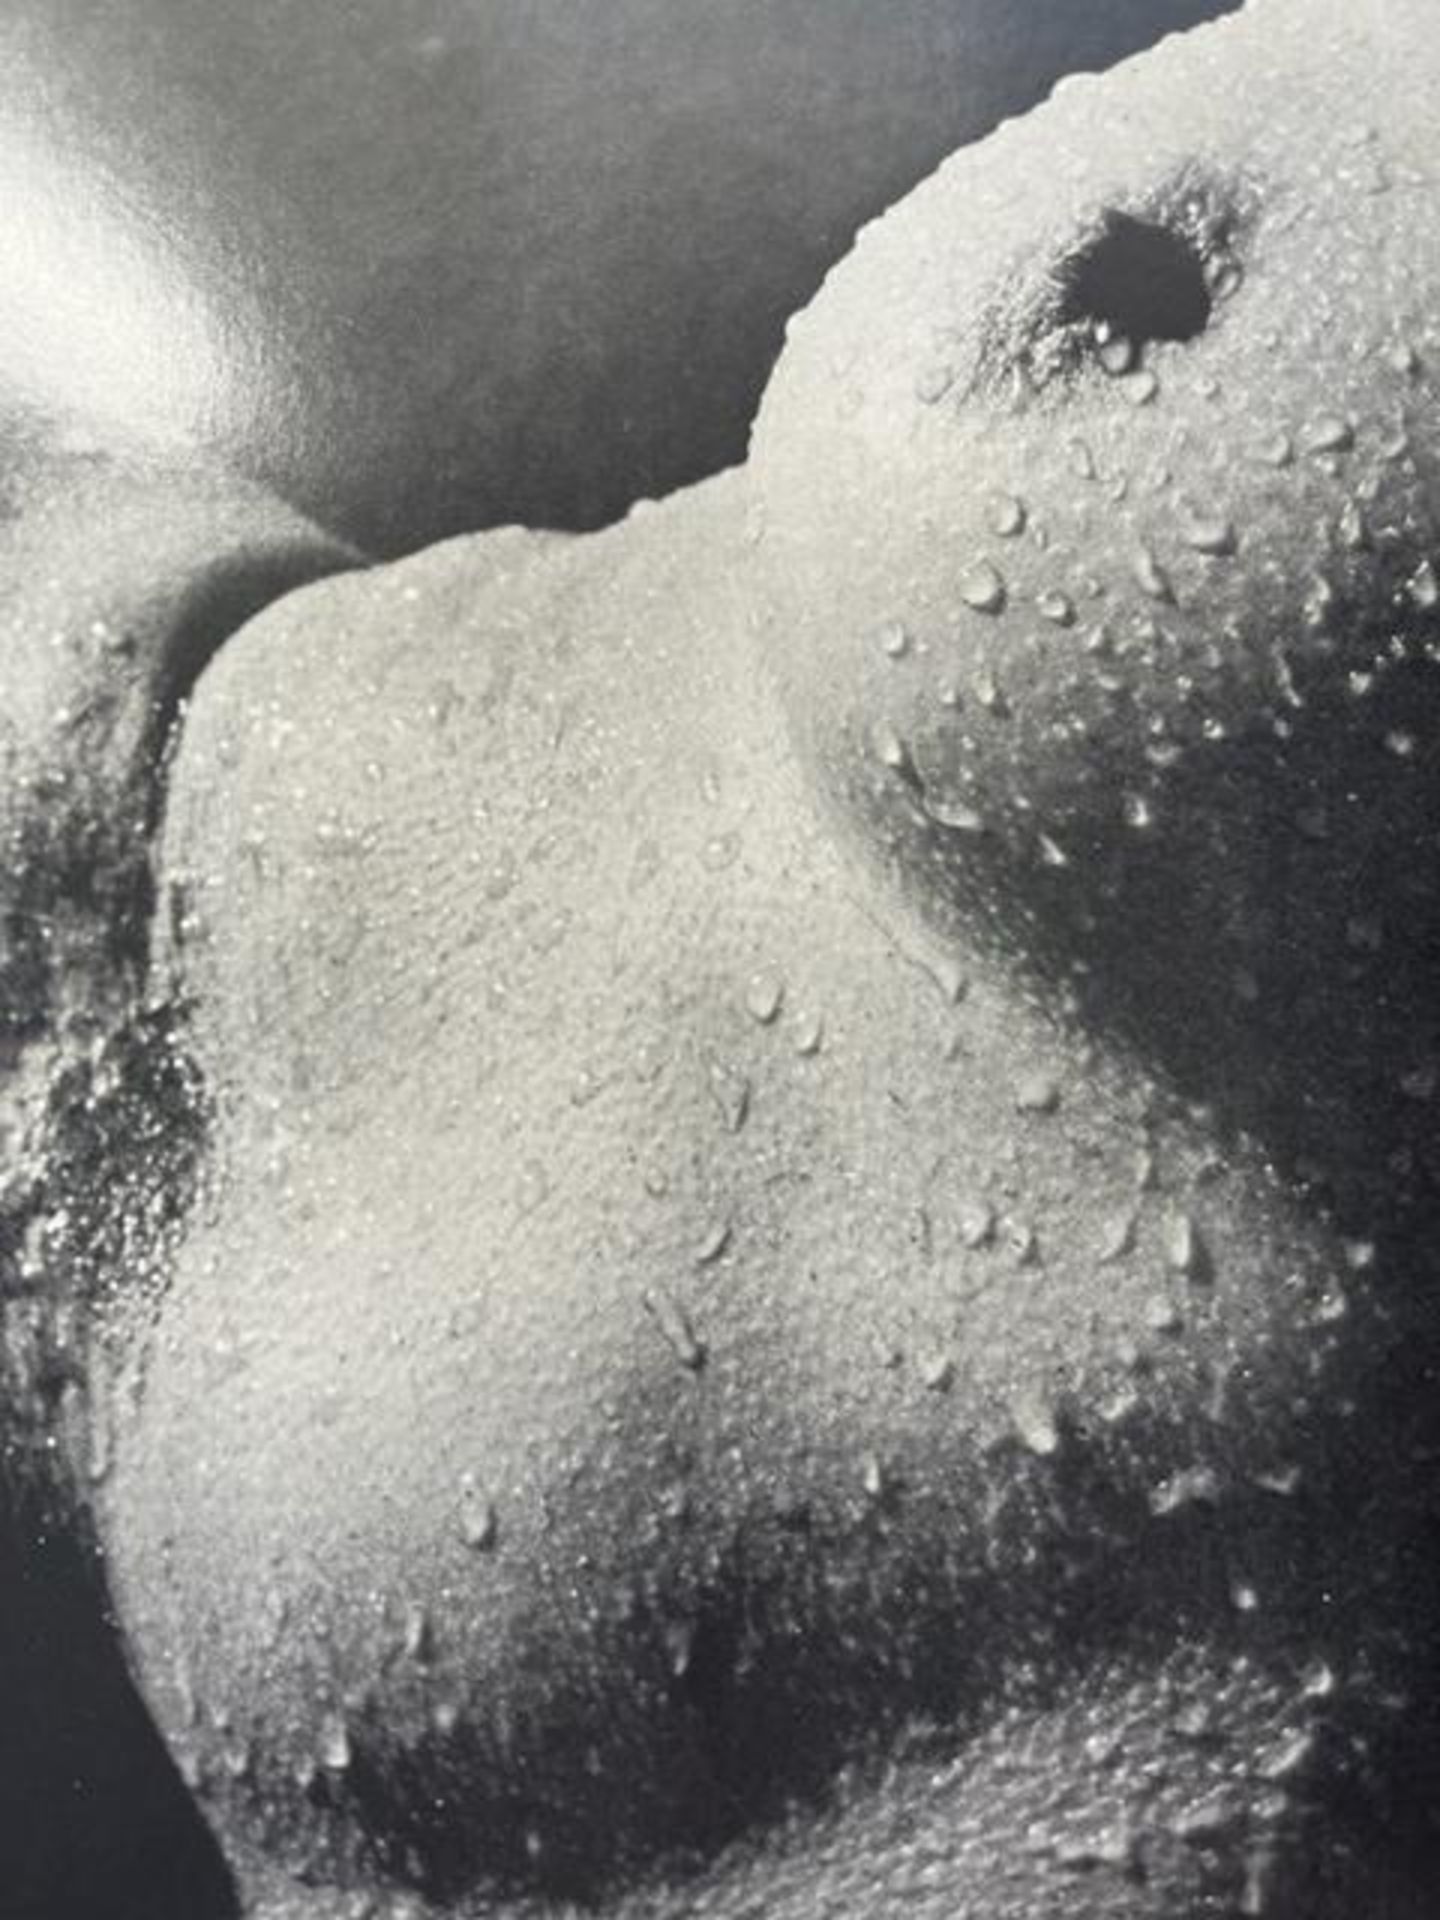 Lucien Clergue "Untitled" - Image 5 of 6